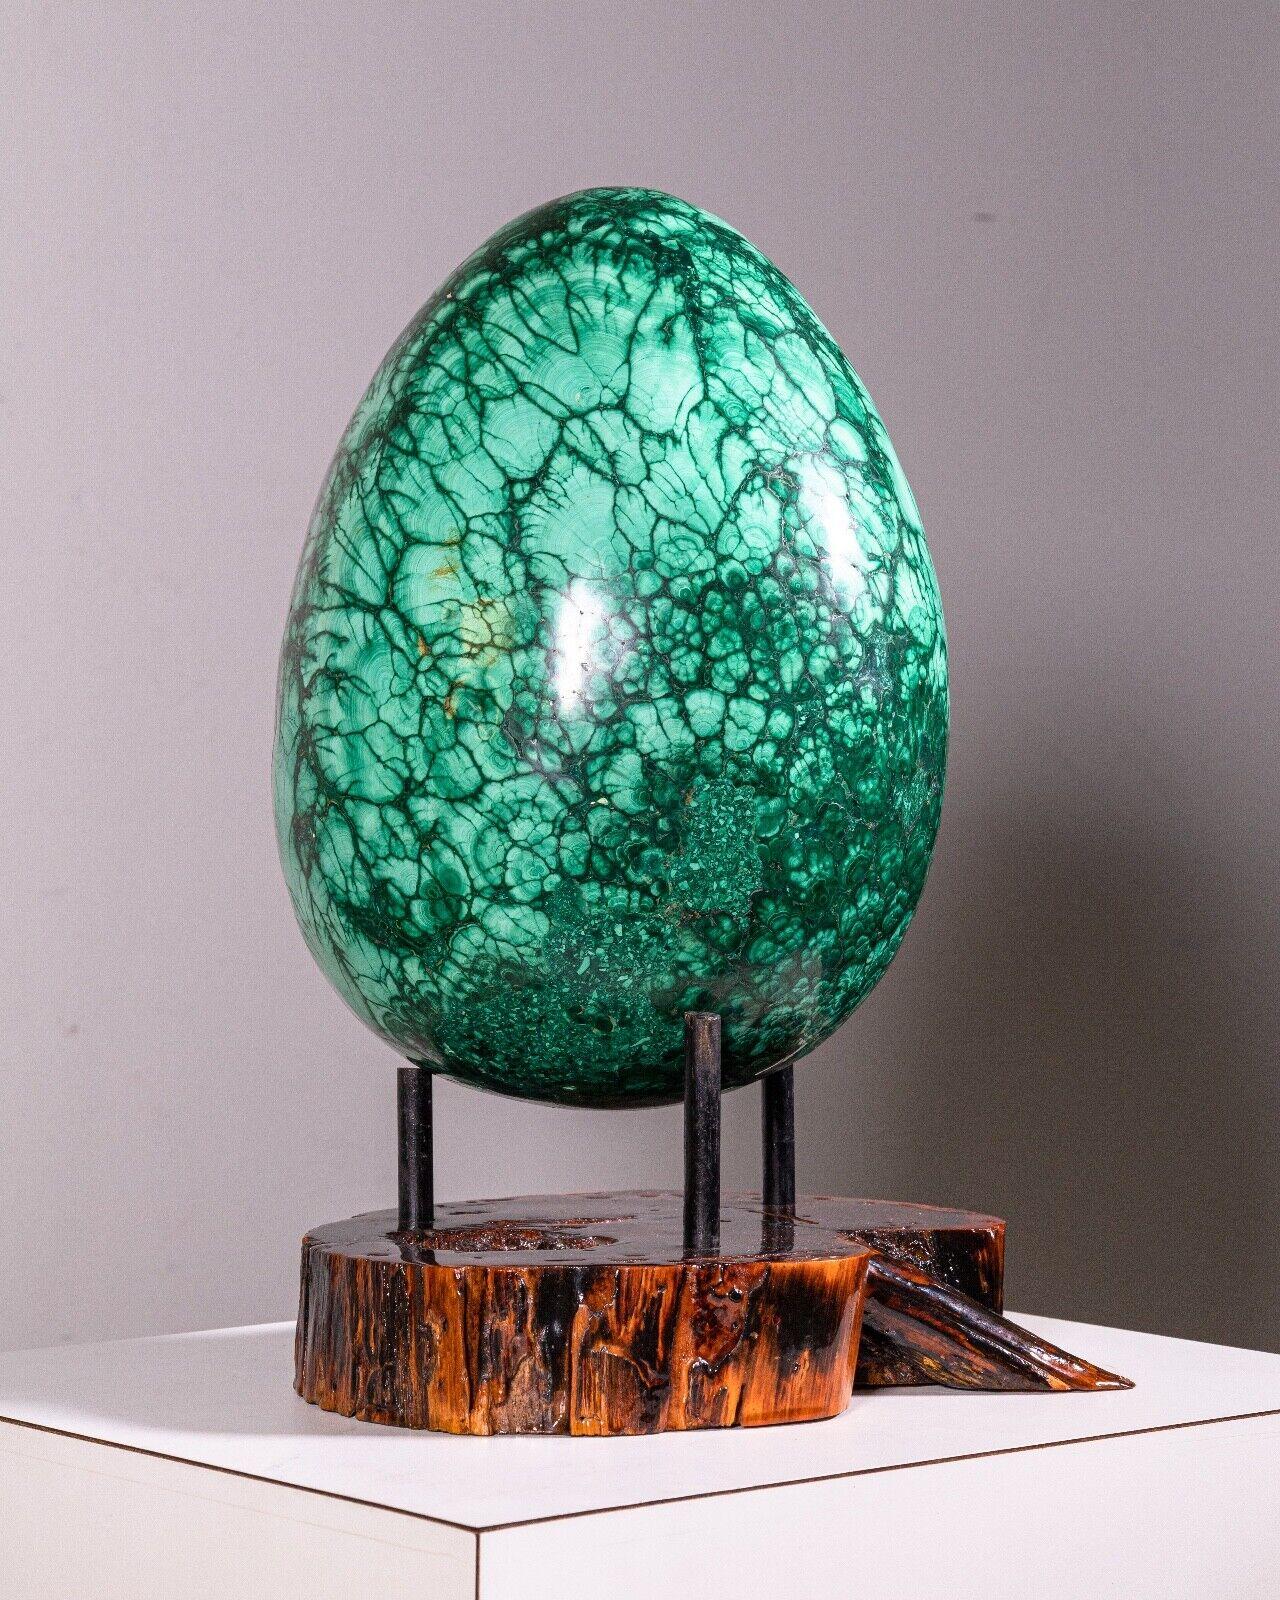 This stunning Belle Epoque Russian Carved Forest Malachite Egg is a work of art. It is carved from solid malachite, a rare and precious mineral, in the shape of a traditional Faberge egg. It is a truly unique and special piece that would make a